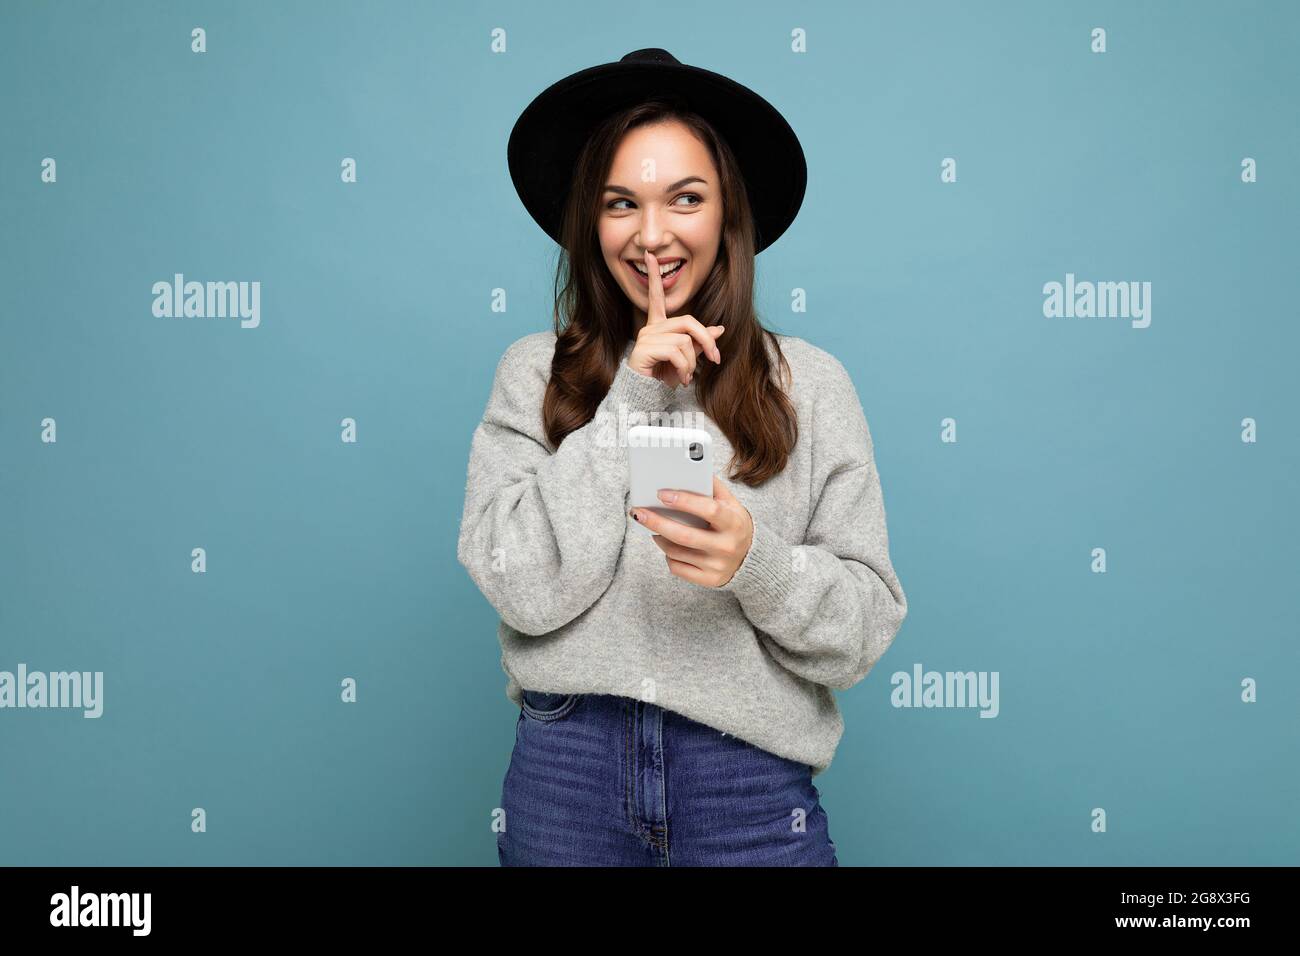 Attractive young smiling woman wearing black hat and grey sweater holding smartphone looking to the side showing shhh gesture isolated on background Stock Photo